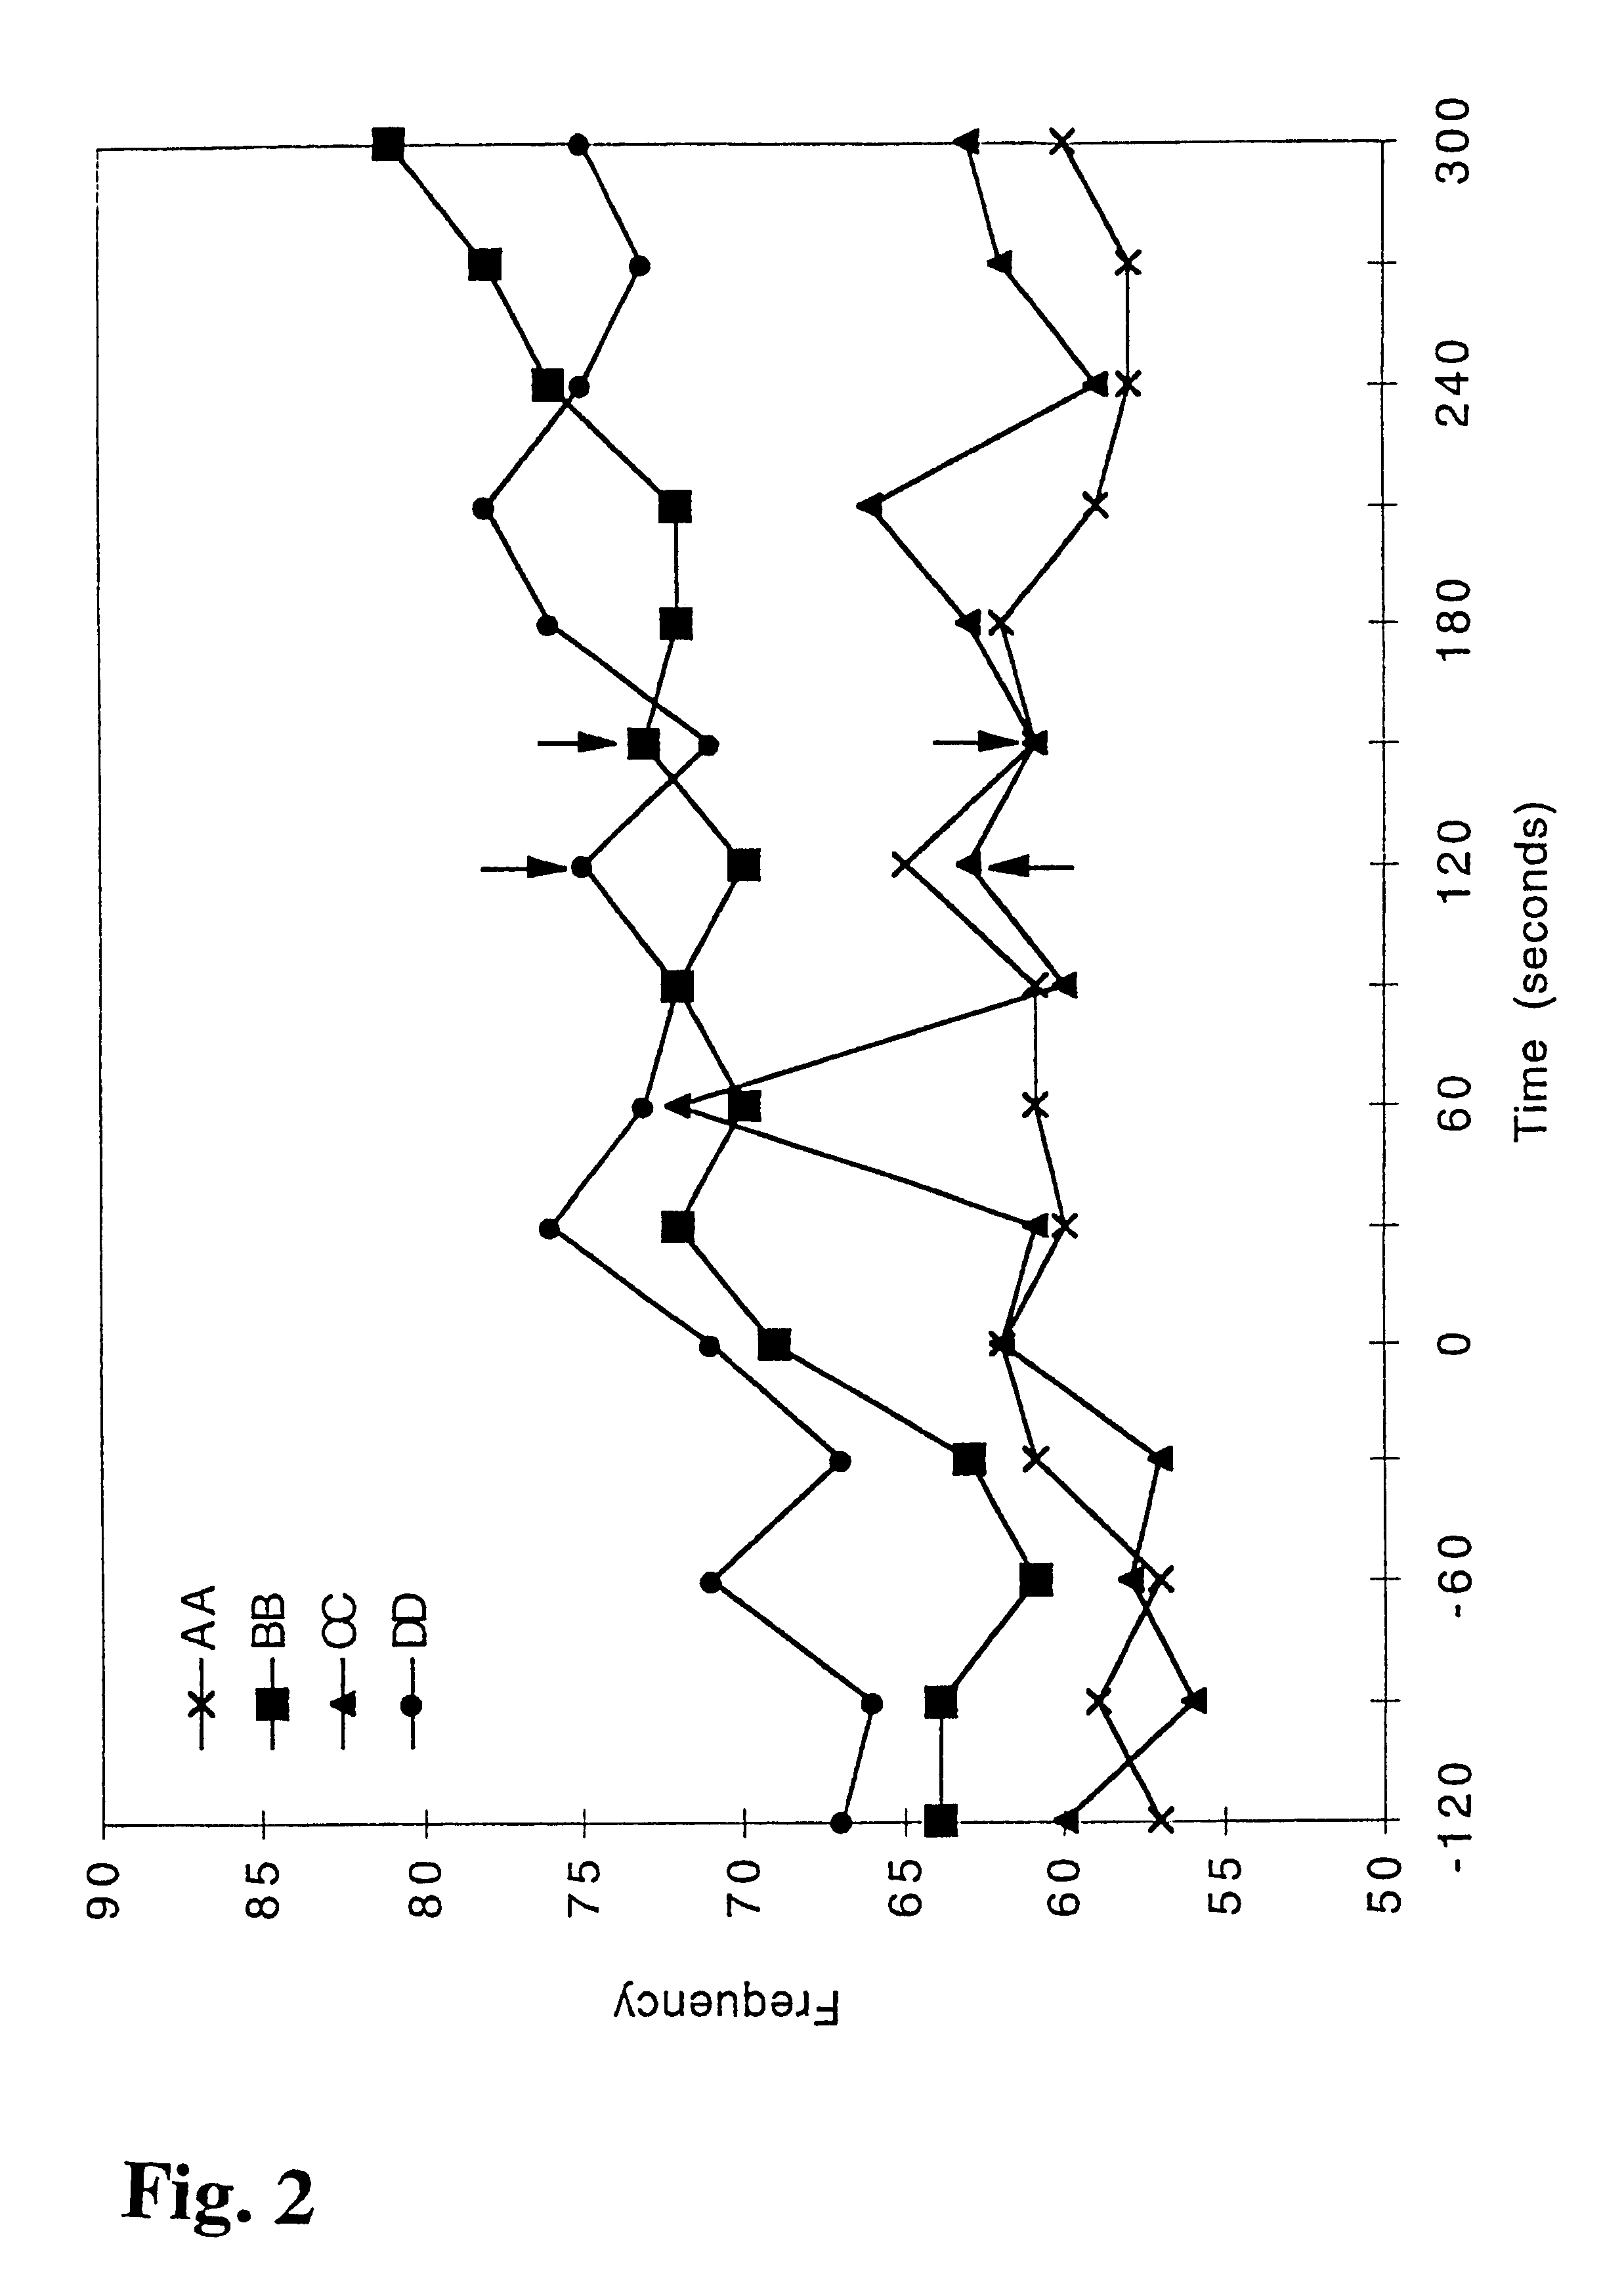 Nicotine-containing pharmaceutical compositions giving a rapid transmucosal absorption